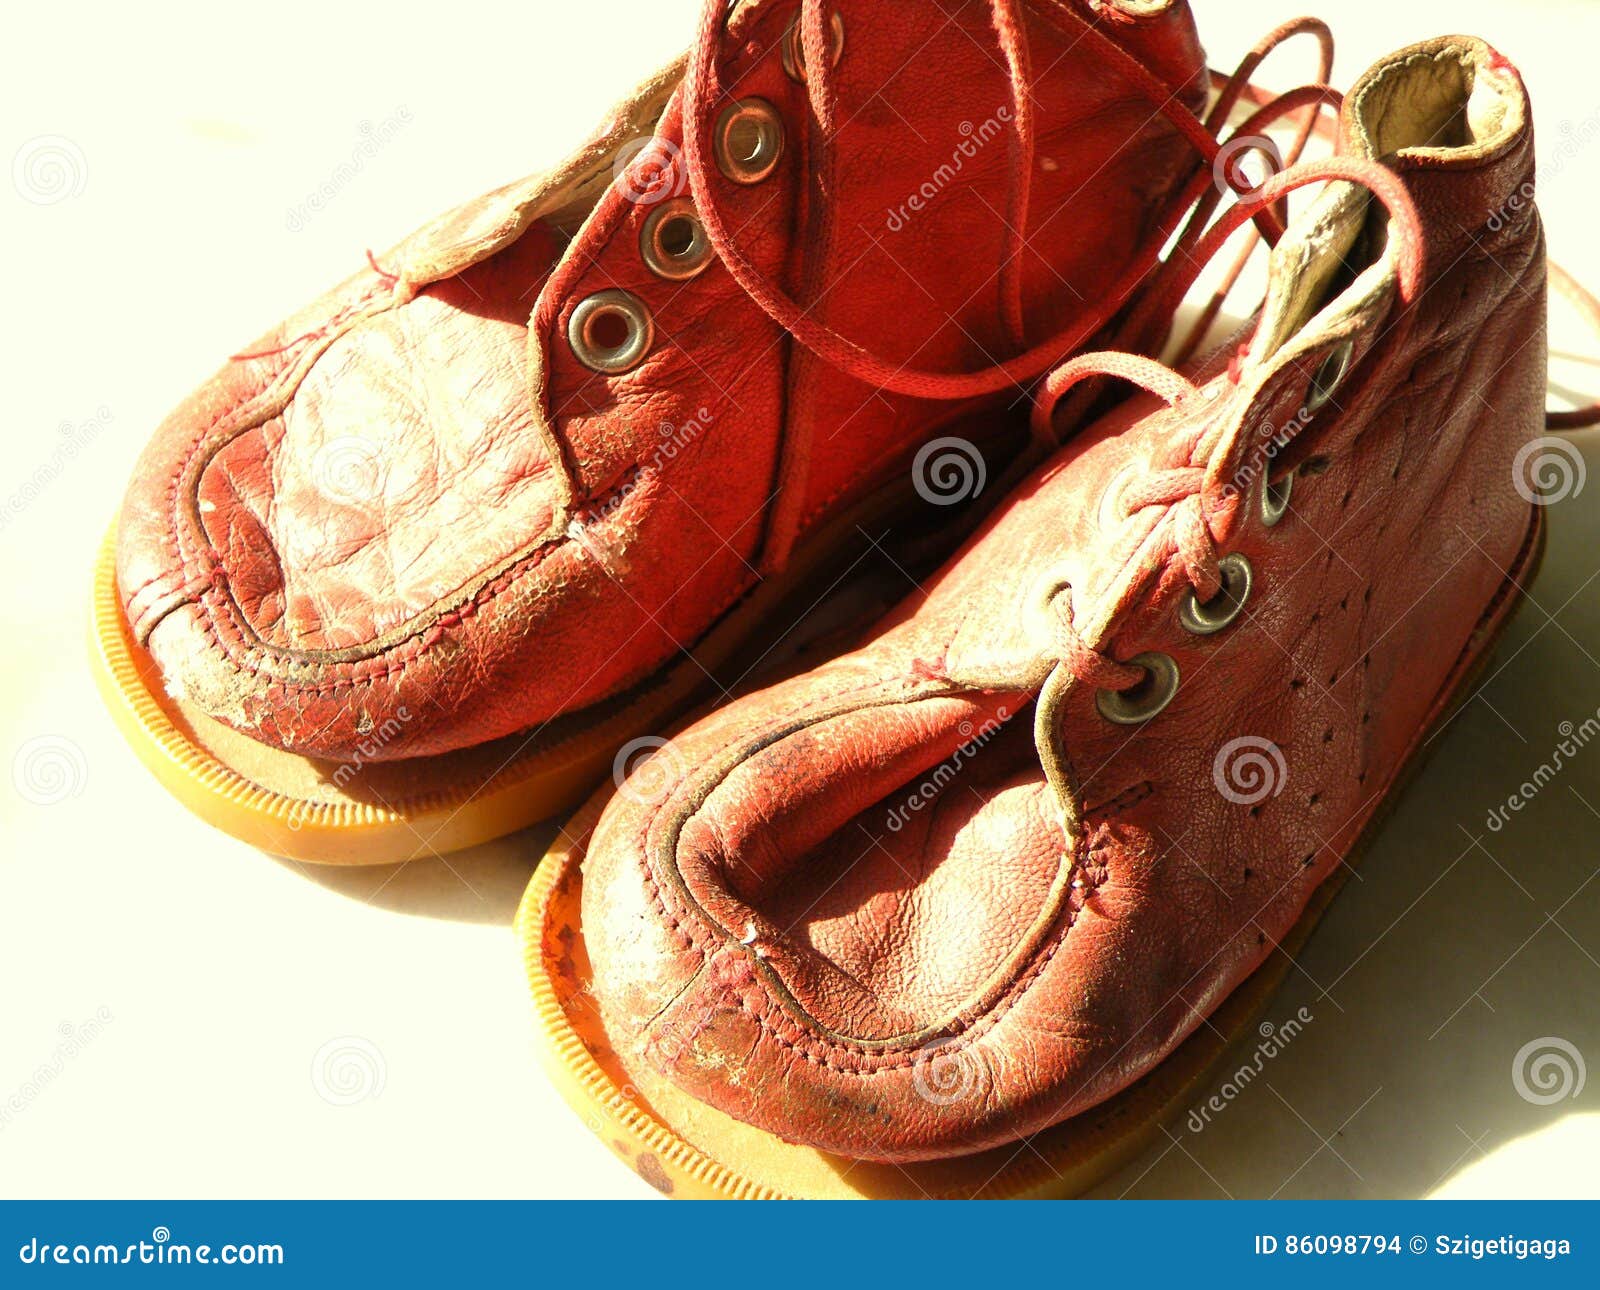 Vintage Baby Dolls Red Leather Shoes Stock Photo - Image of human, cute:  86098794